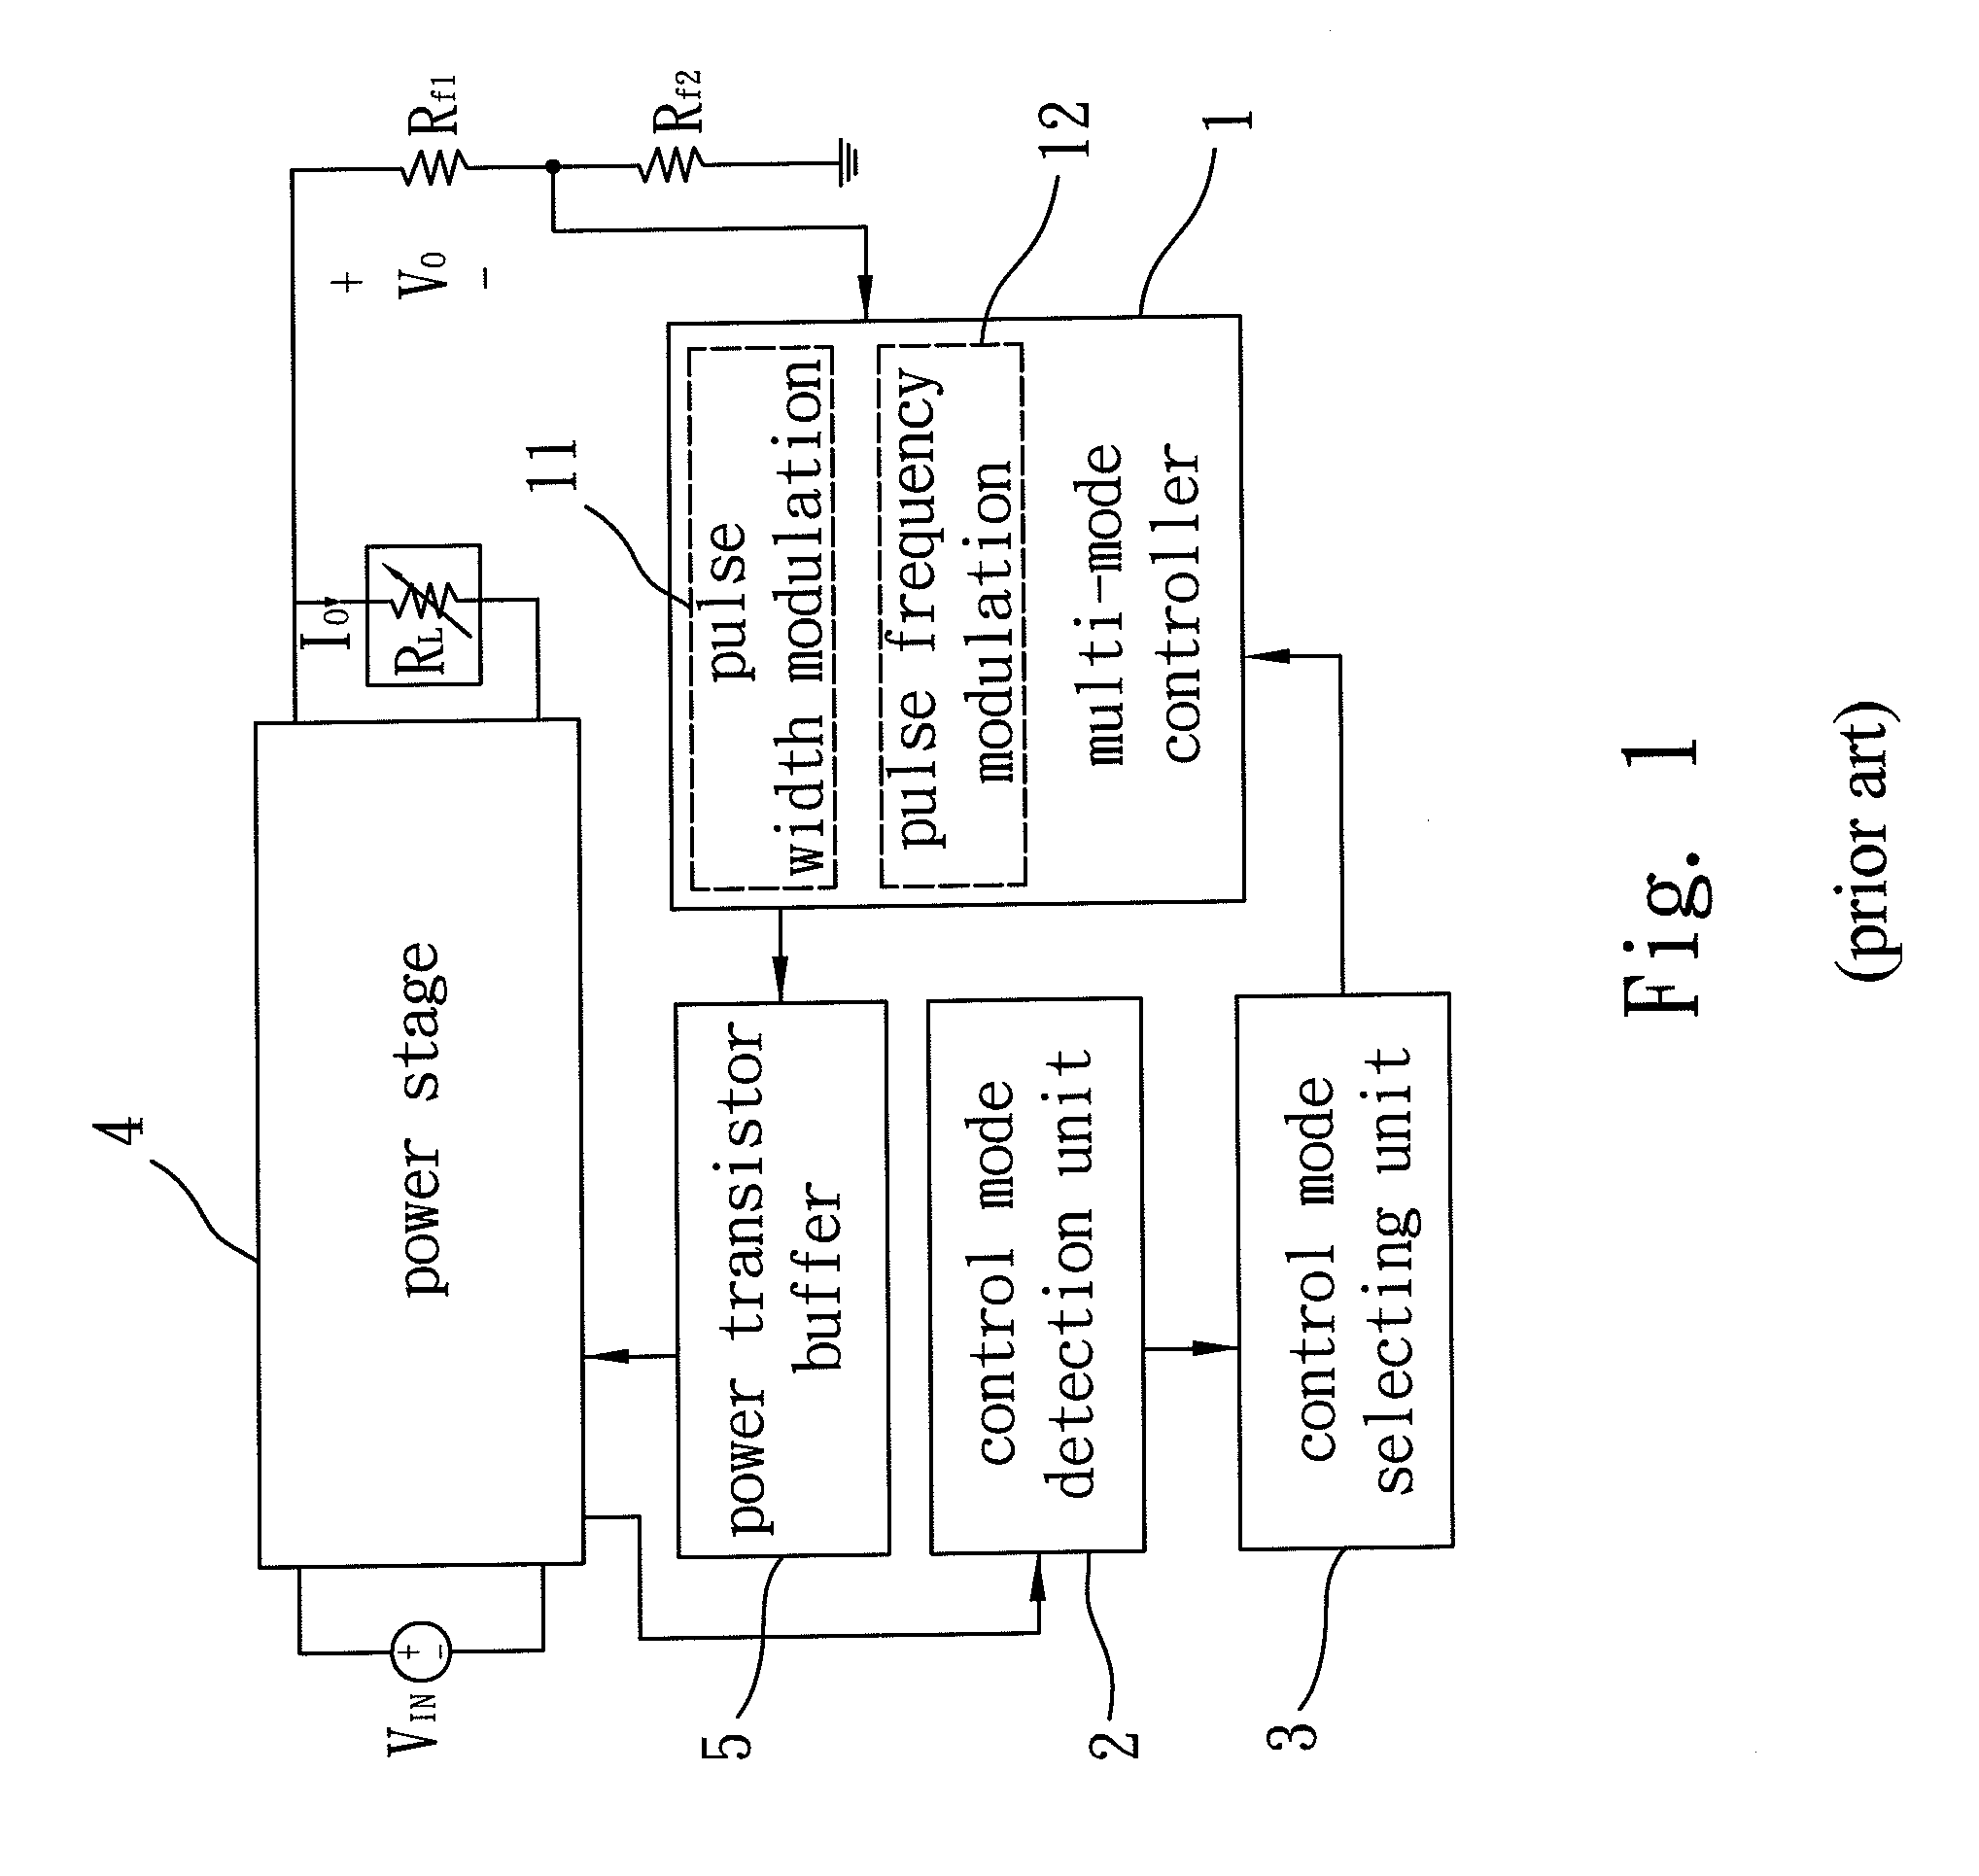 Energy-based Oriented Switching Mode Power Supply